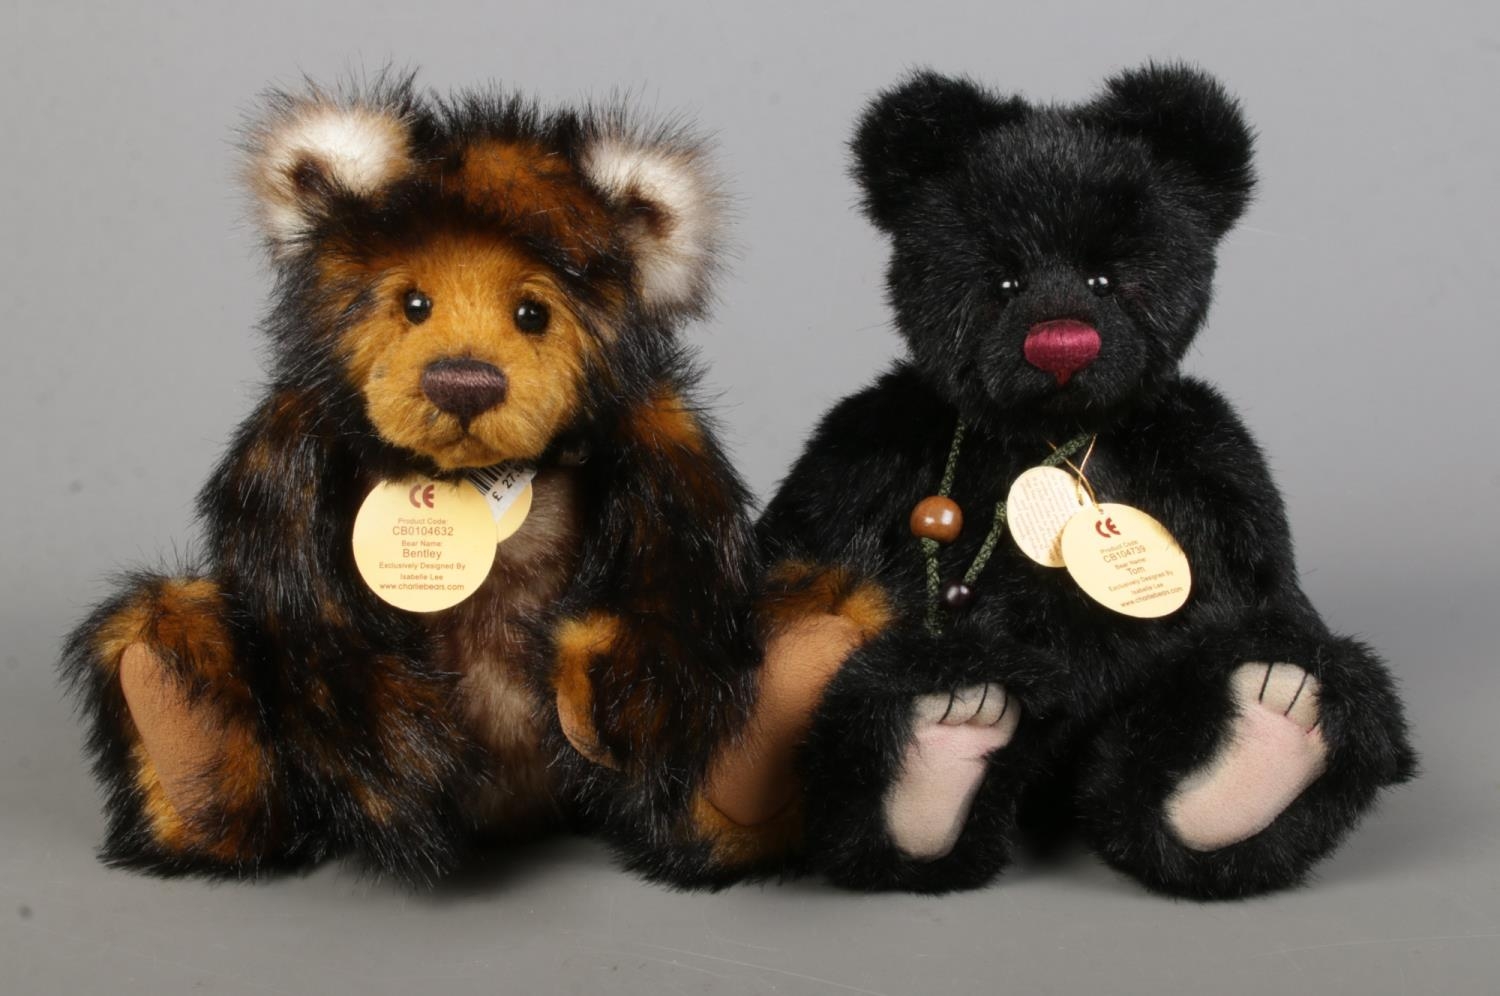 Two Charlie Bears jointed teddy bears. Tom (CB104739), and Bentley (CB104632). Both designed by